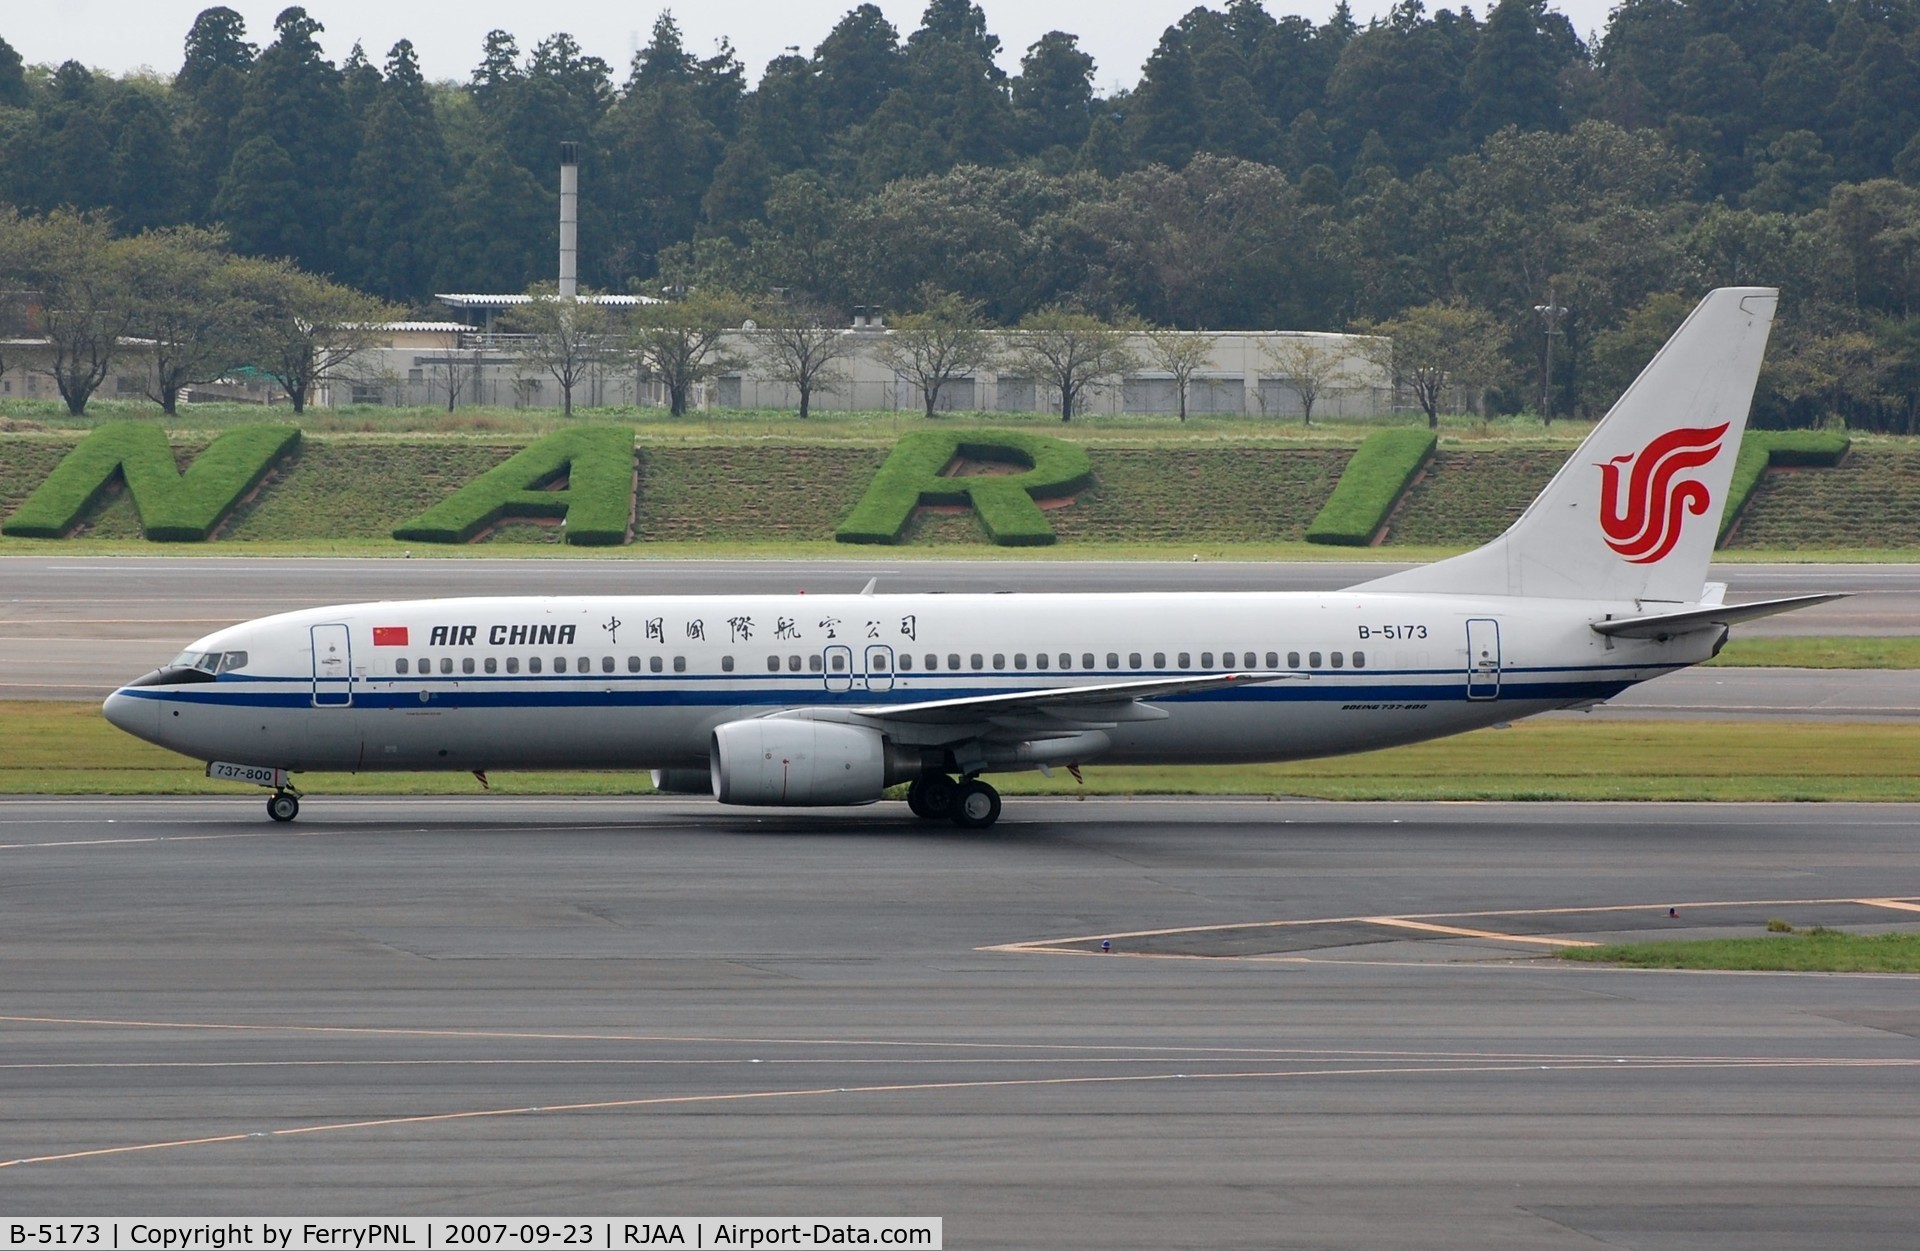 B-5173, 2006 Boeing 737-8Q8 C/N 30705, Arrival of Air China B738. Aircraft transferred to Ethiopian in 2016.